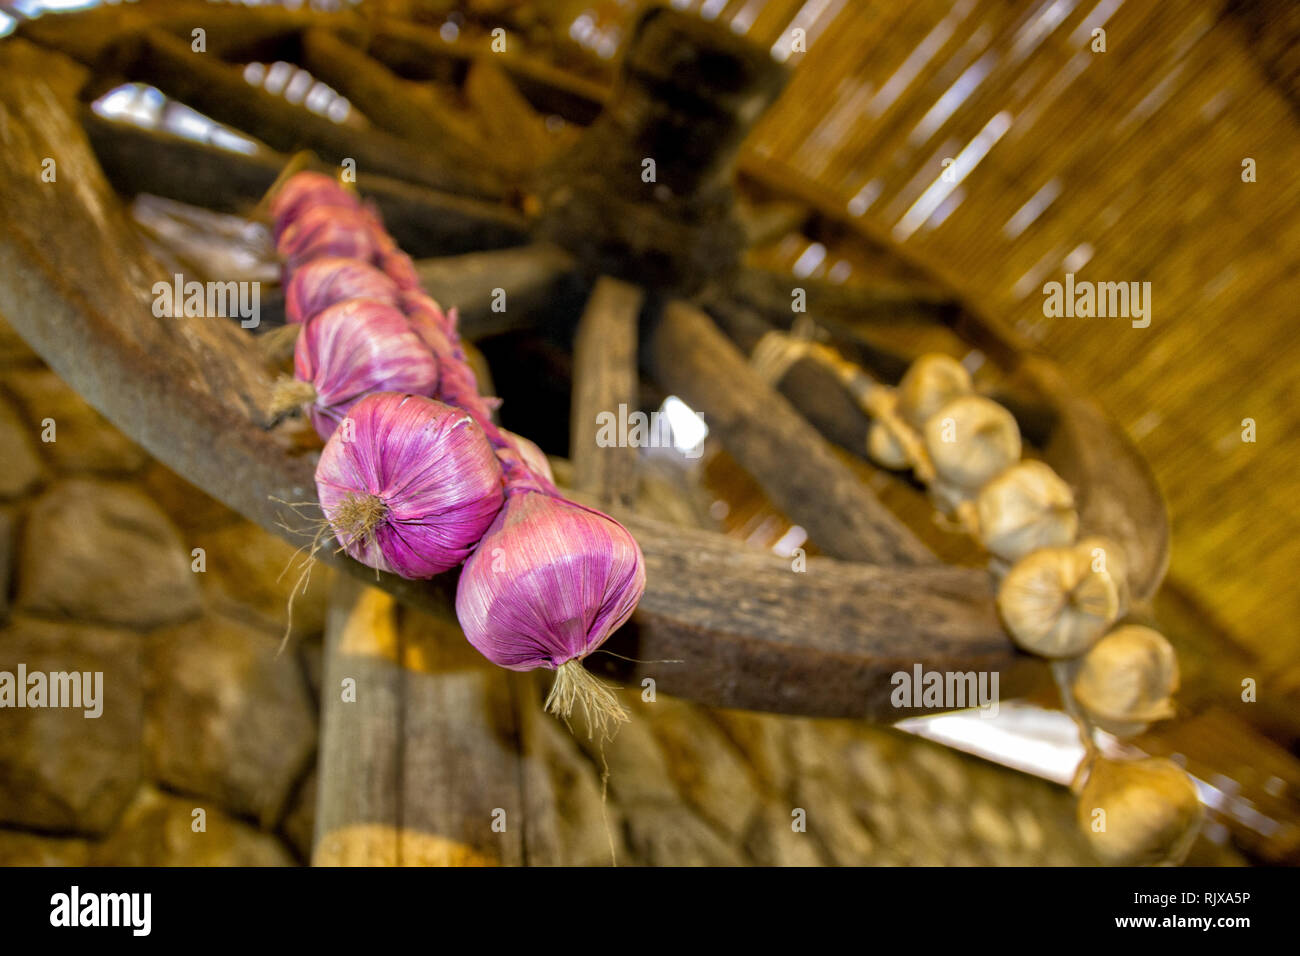 Bunch of onions hanging from a wheel of an old cart Stock Photo